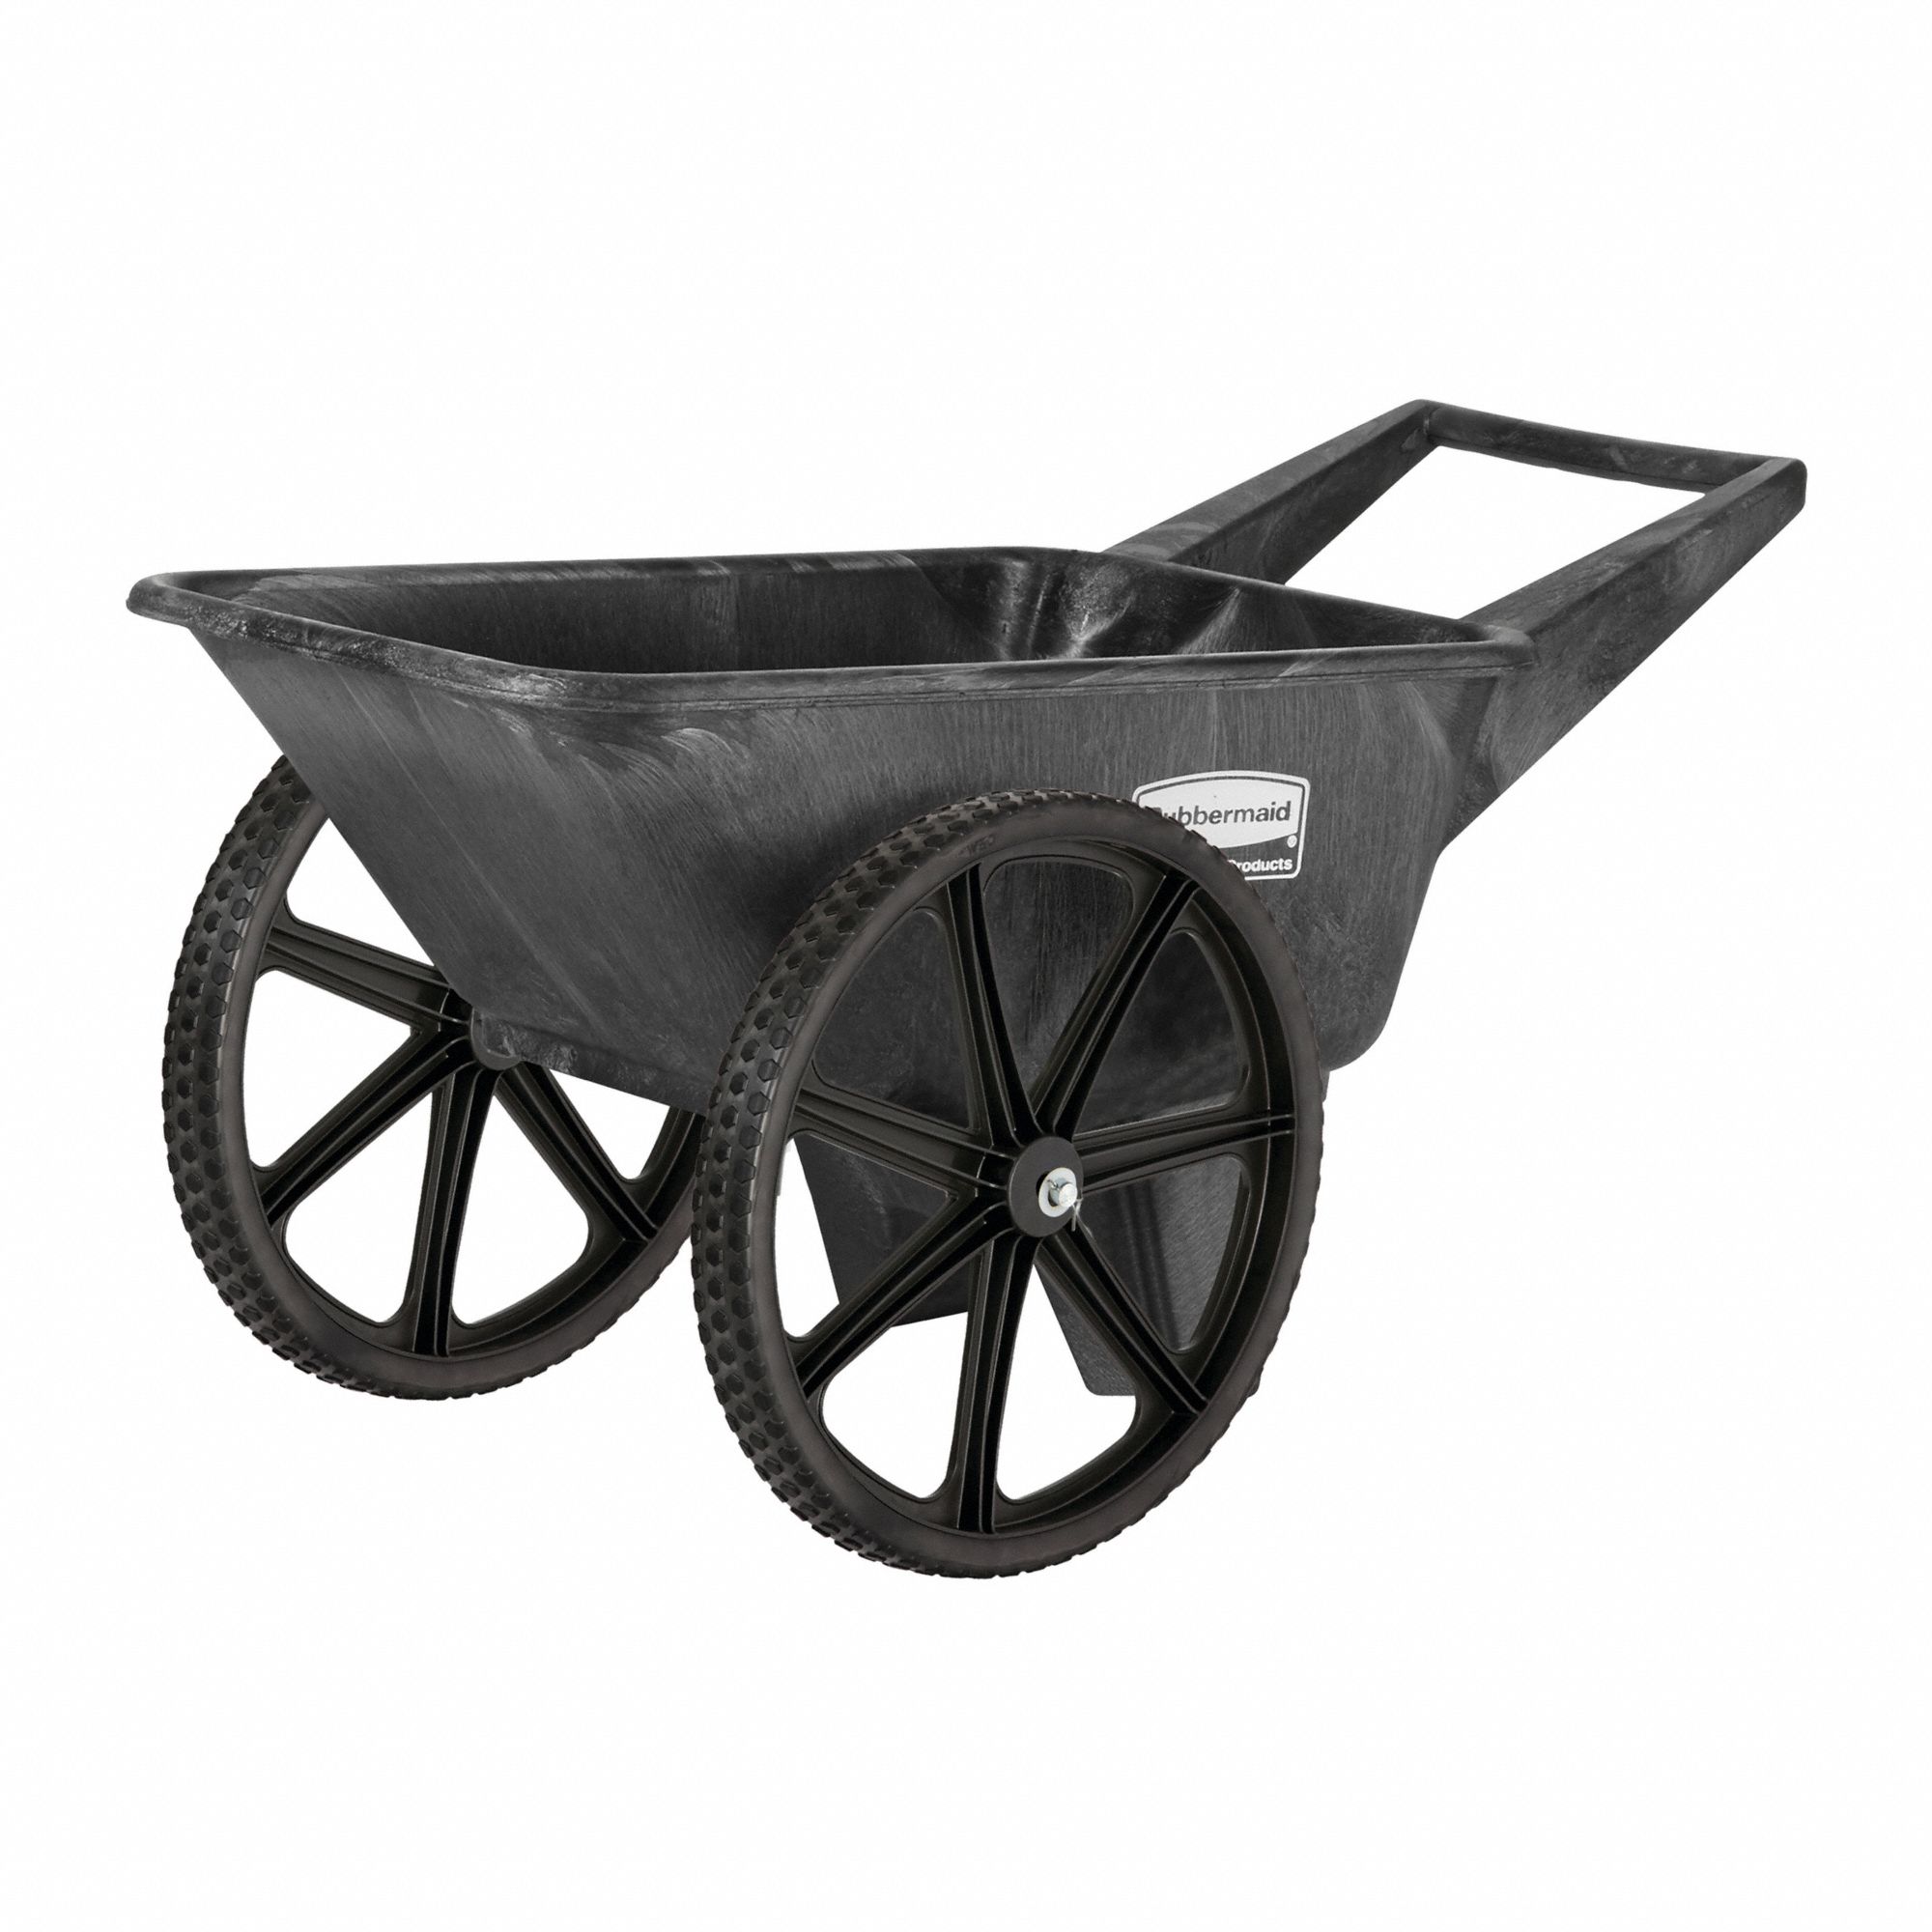 Rubbermaid® Black Utility Cart with Pneumatic Wheels - 54 x 25 x 37